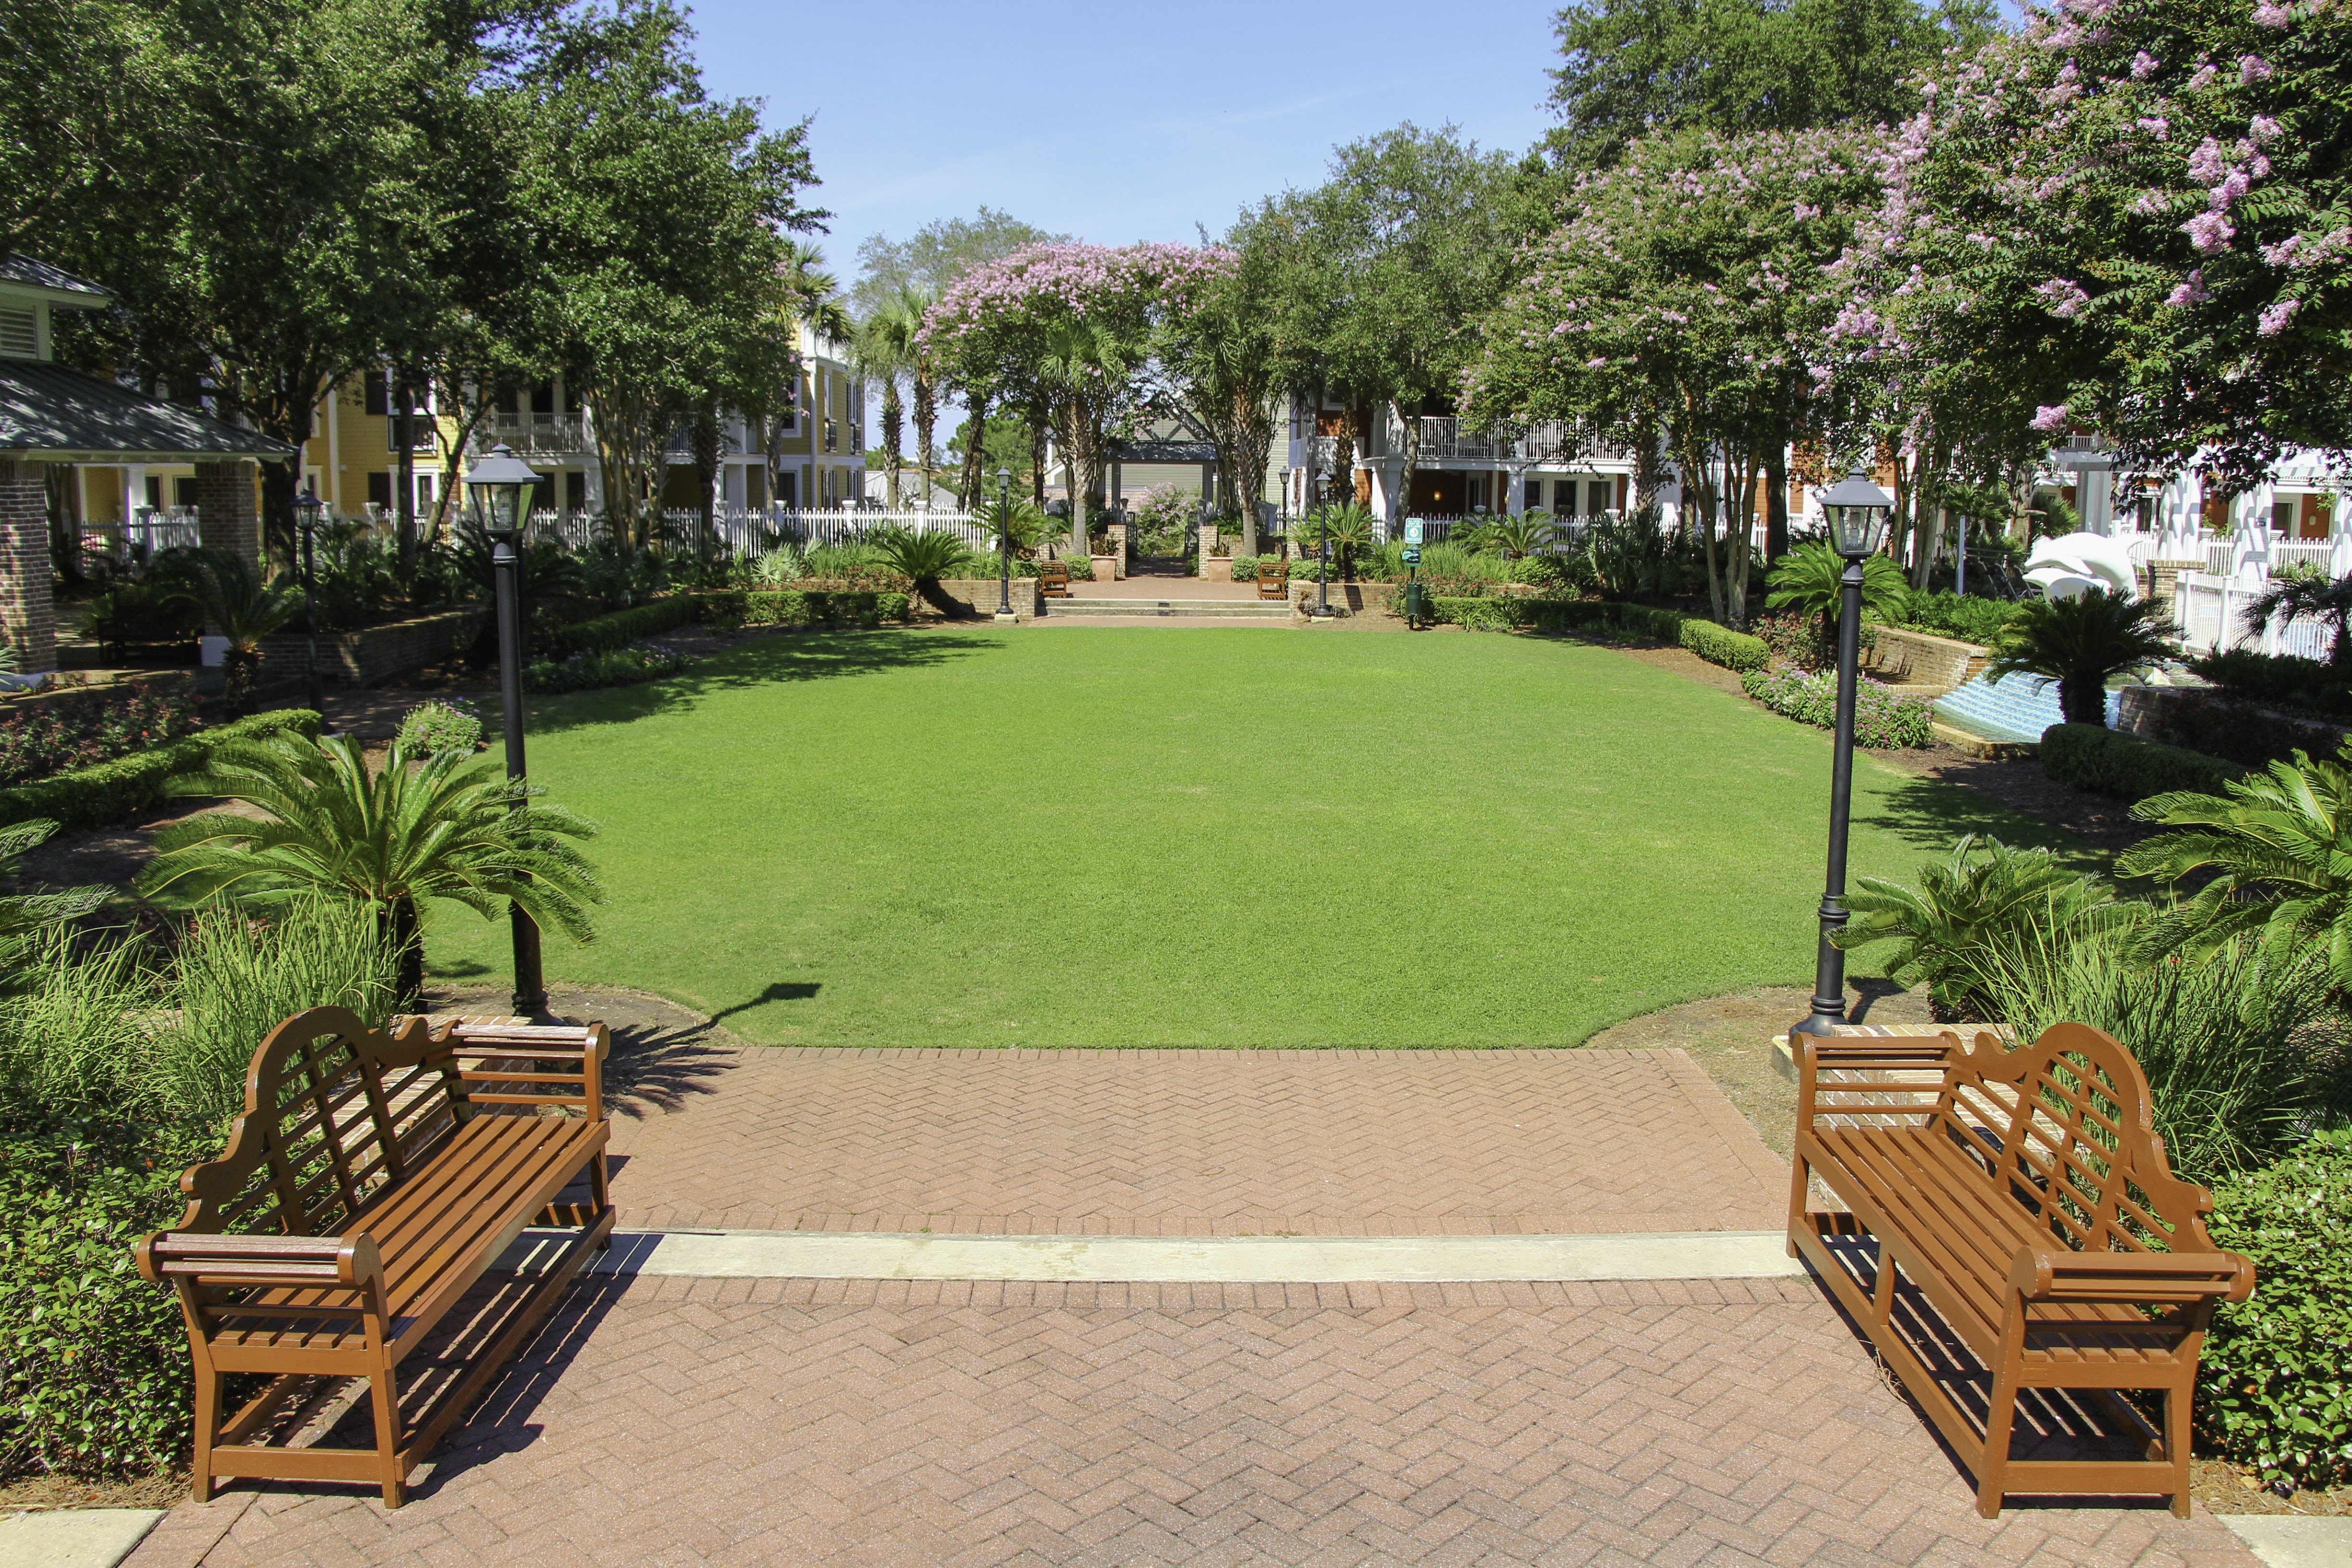 Our commercial landscaping work on a Florida commerce park